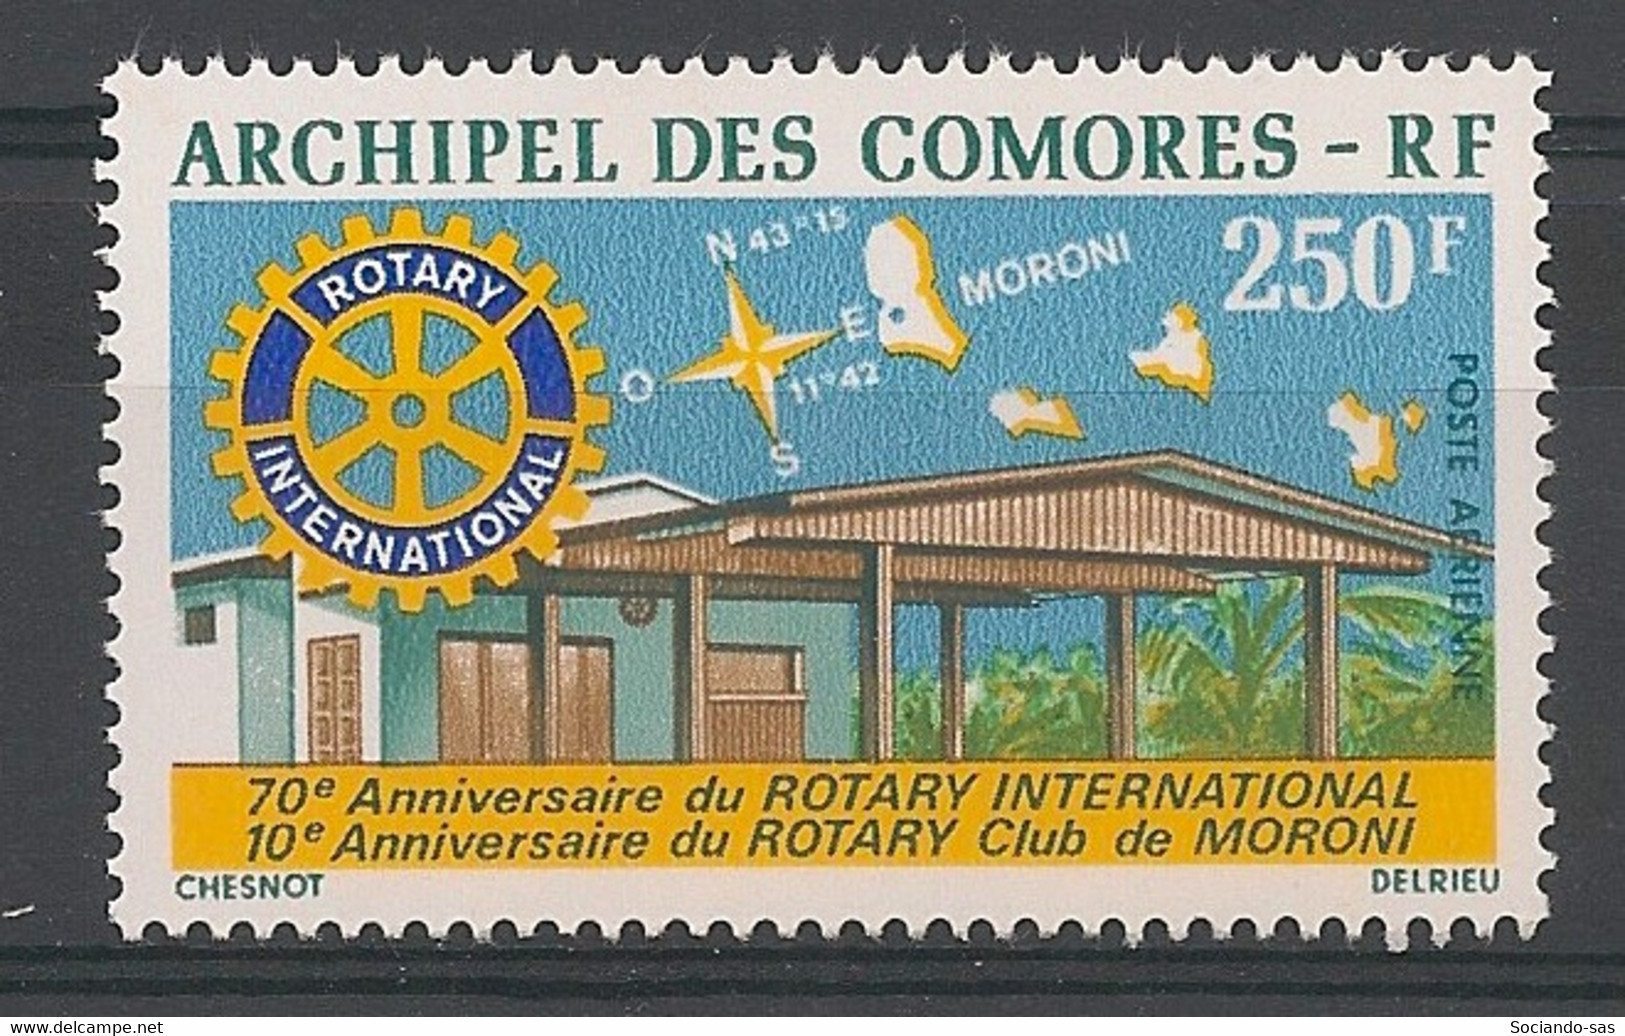 COMORES - 1975 - Poste Aérienne PA N°YT. 66 - Rotary - Neuf Luxe ** / MNH / Postfrisch - Luftpost